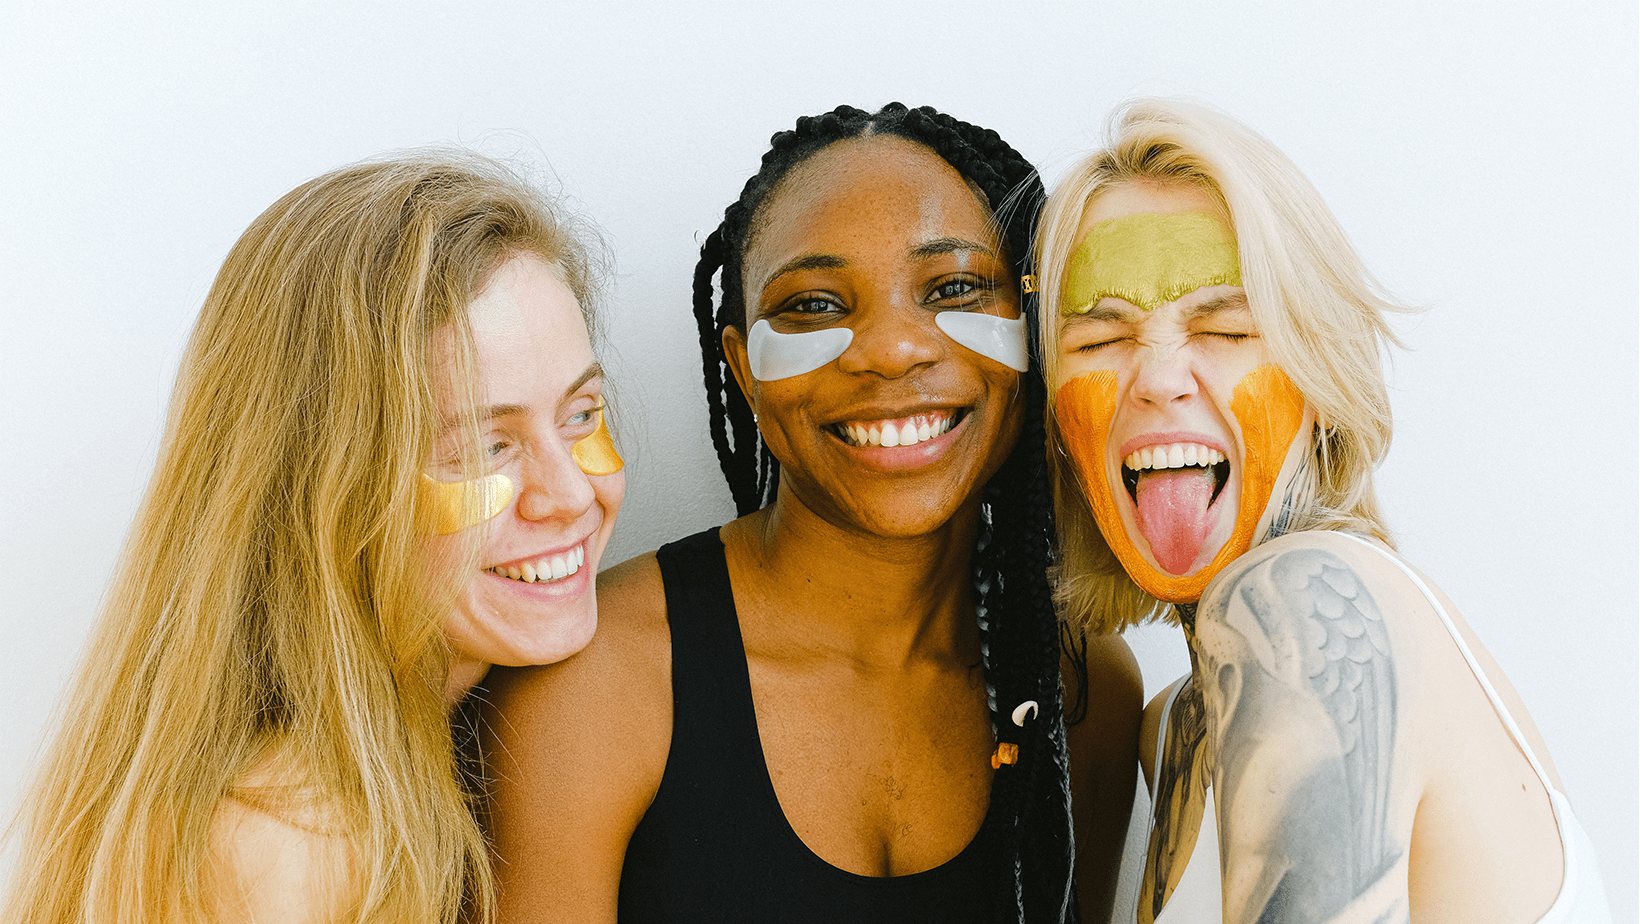 Three young women, one black and two white, smile against a white background. They are wearing neutral colours and summer skincare products on their faces.